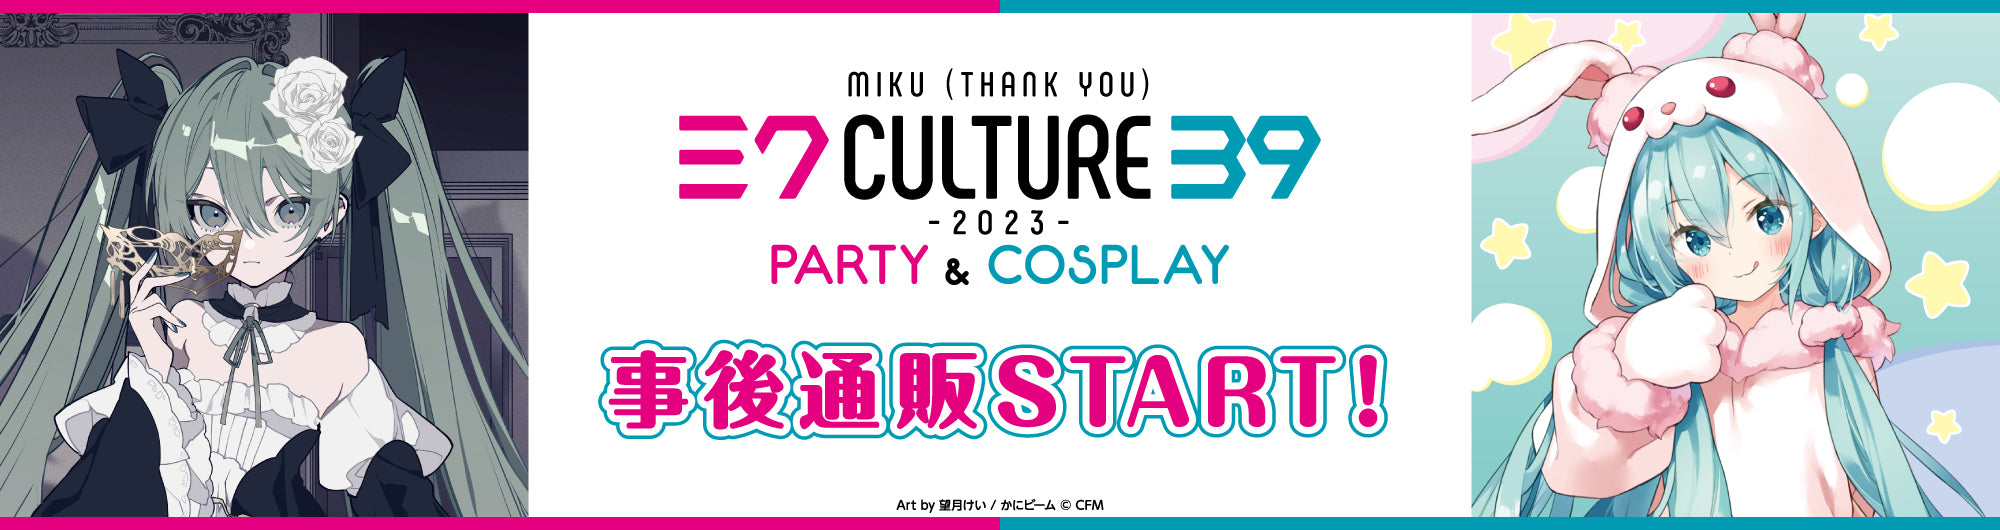 39Culture2023 PARTY&COSPLAY